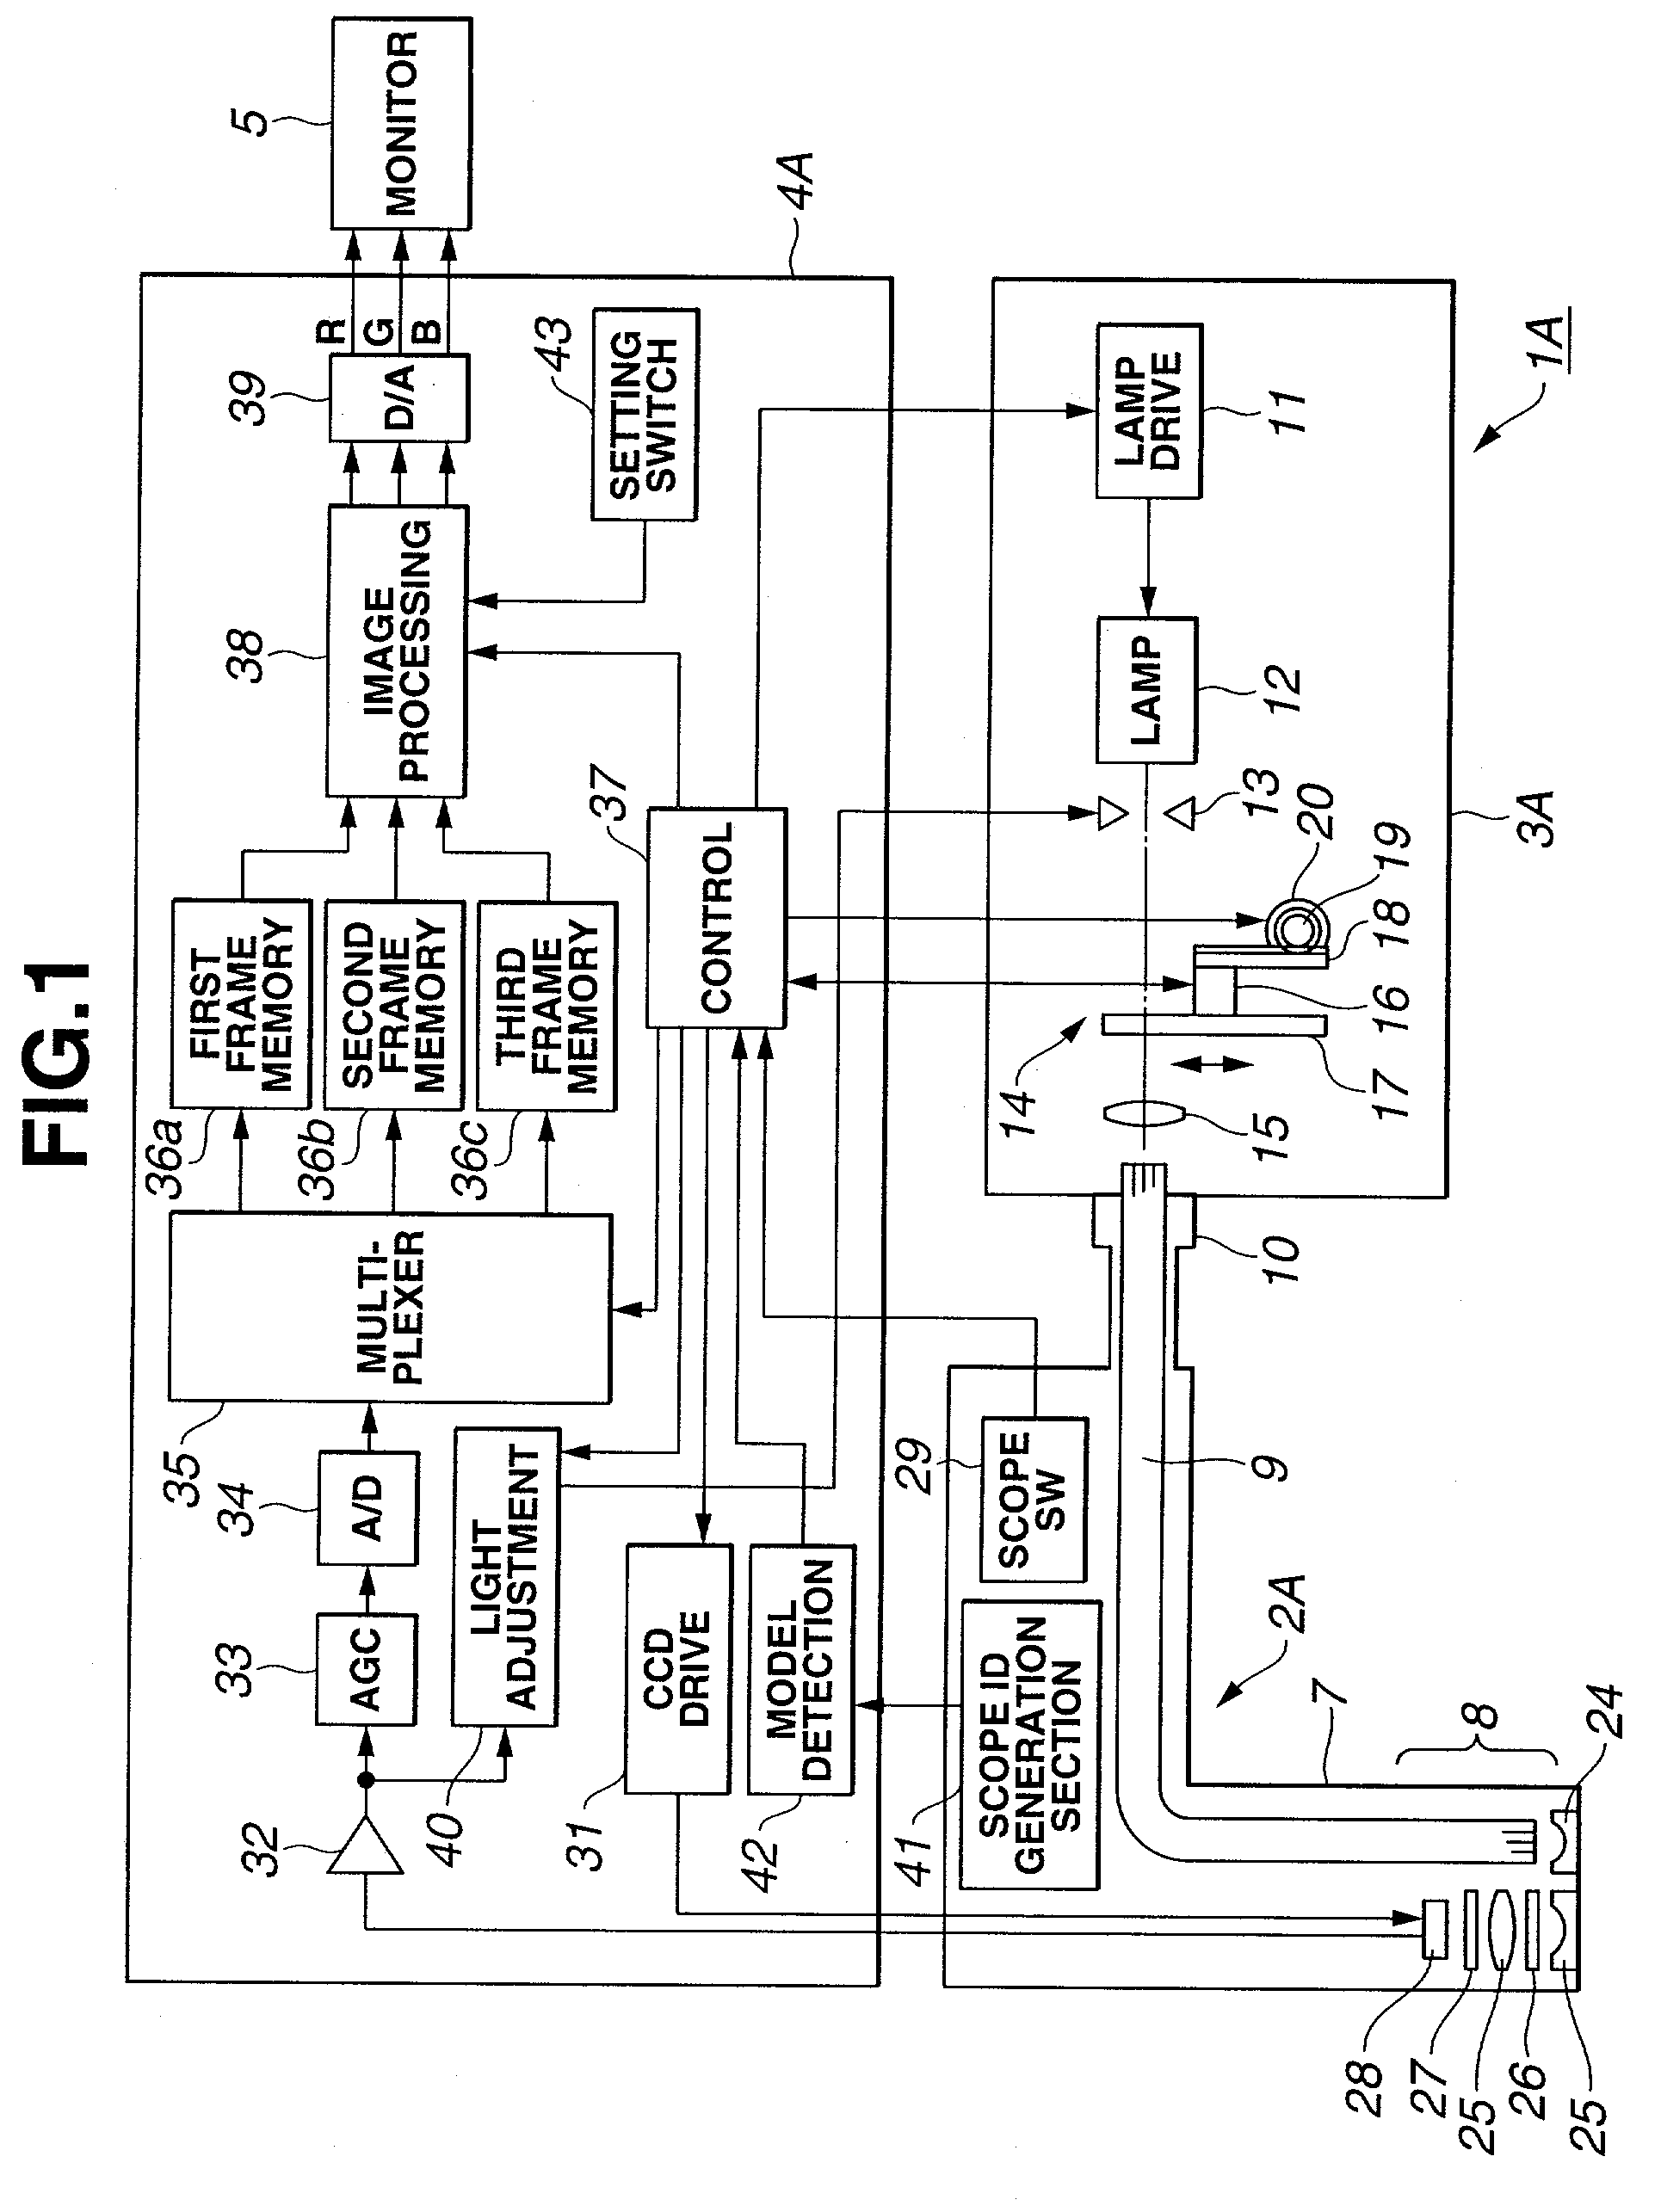 Endoscope system using normal light and fluorescence